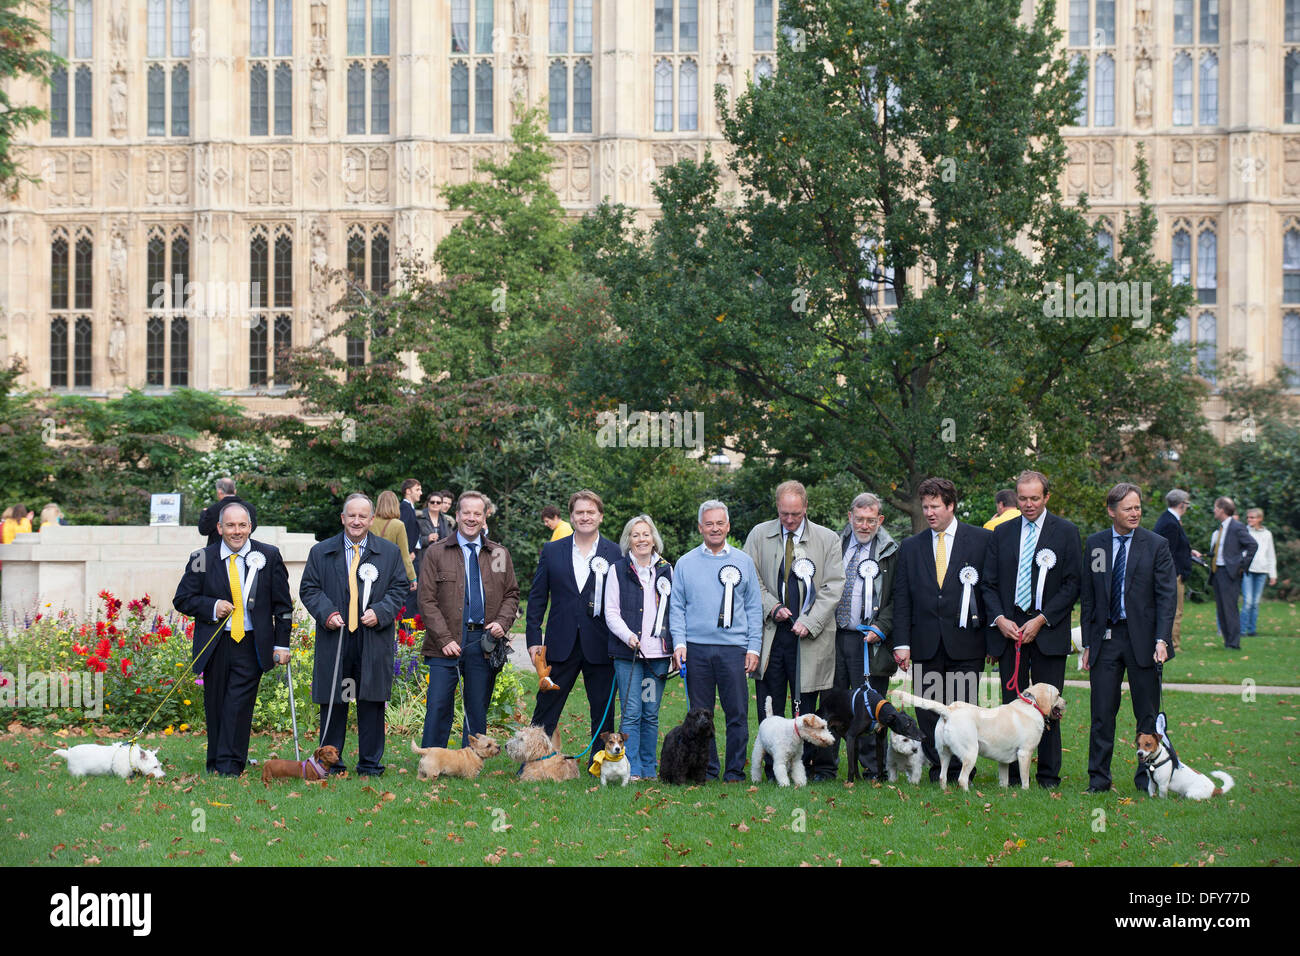 London, UK. Thursday 10th October 2013. MPs and their dogs competing in the Westminster Dog of the Year competition celebrates the unique bond between man and dog - and aims to promote responsible dog ownership. Credit:  Michael Kemp/Alamy Live News Stock Photo